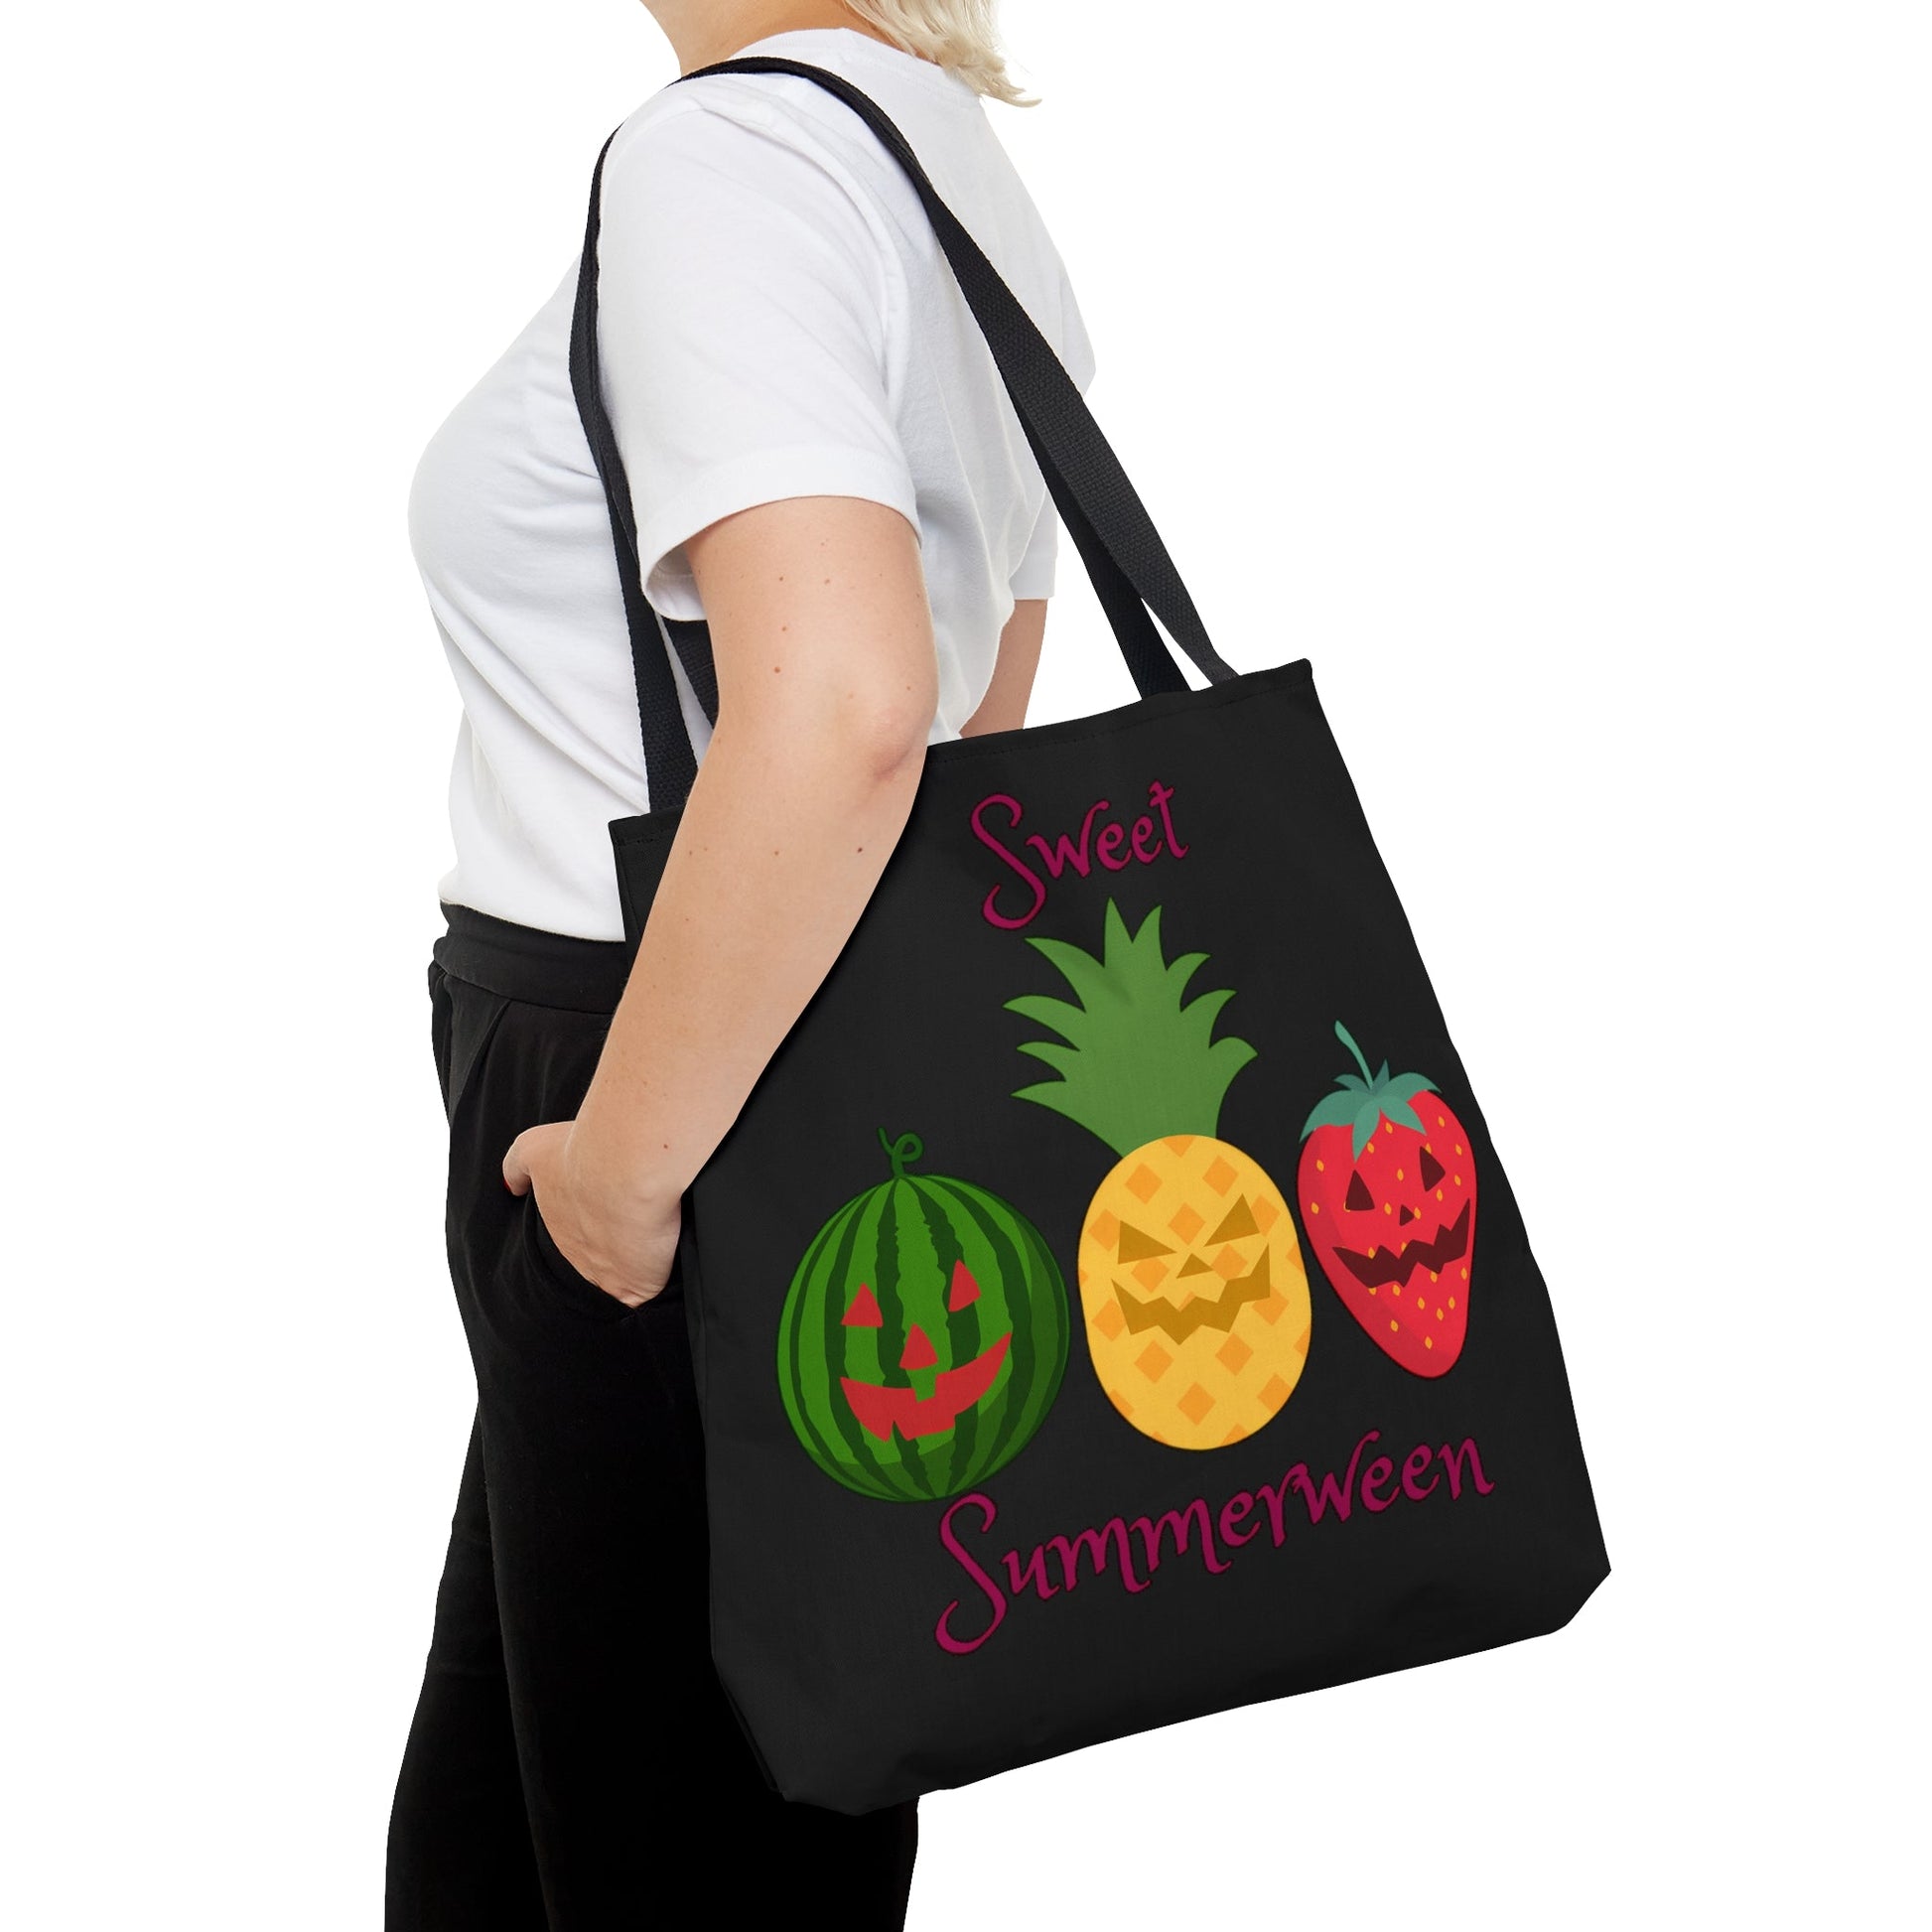 Sweet Summerween Tote BagBagsVTZdesignsLargeAccessoriesAll Over PrintAssembled in the USA